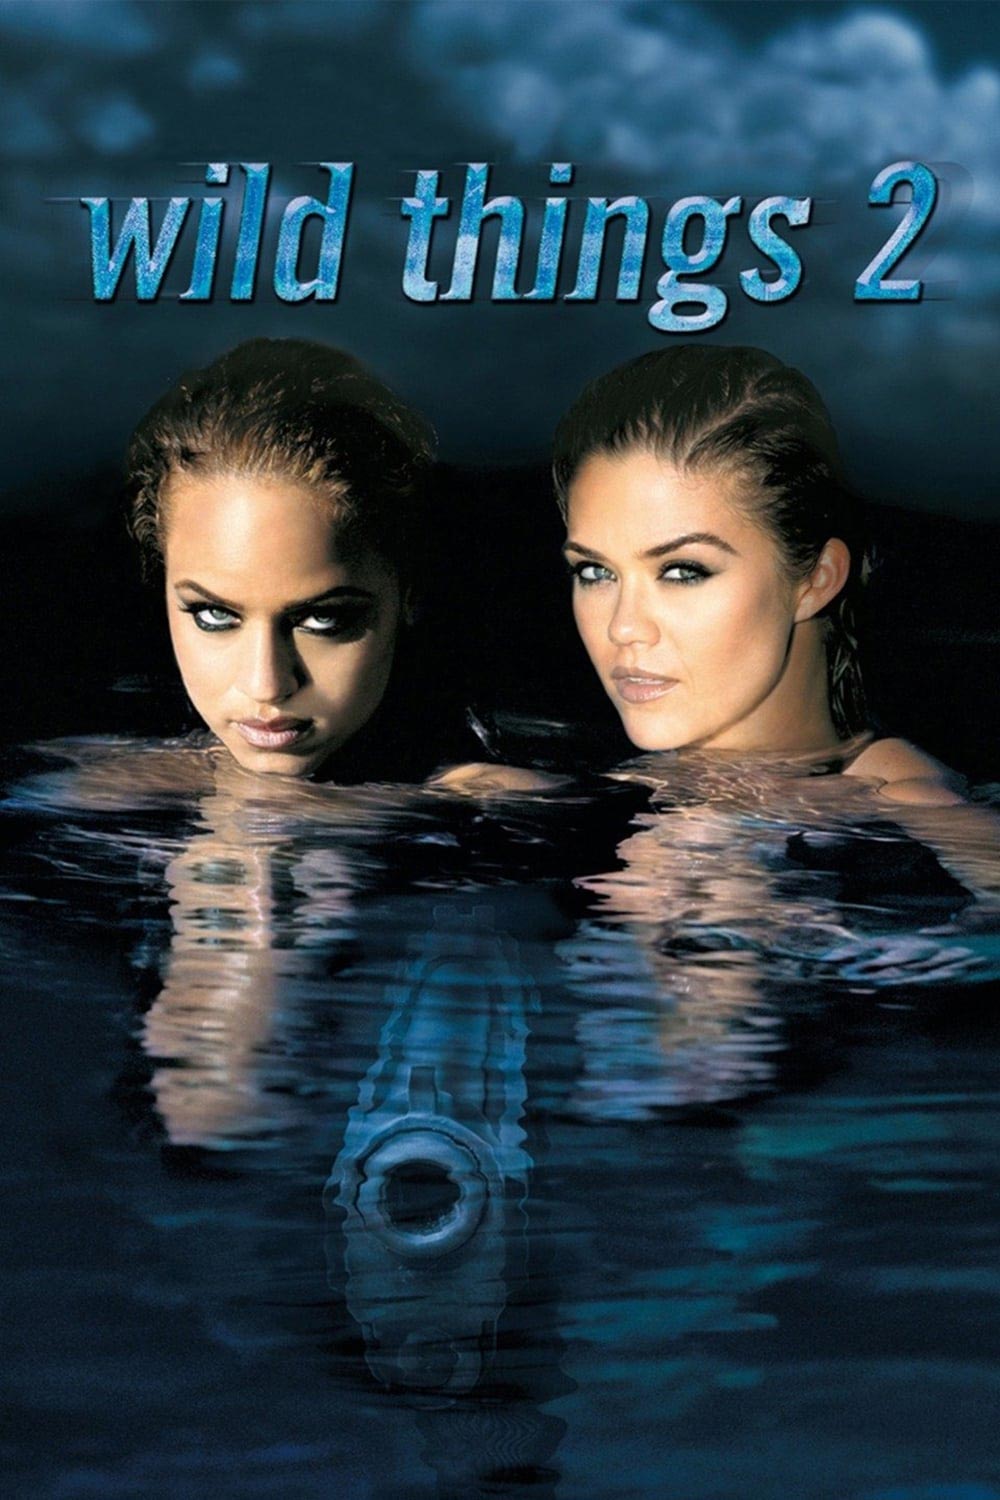 cory mendola recommends wild things 2 sex pic